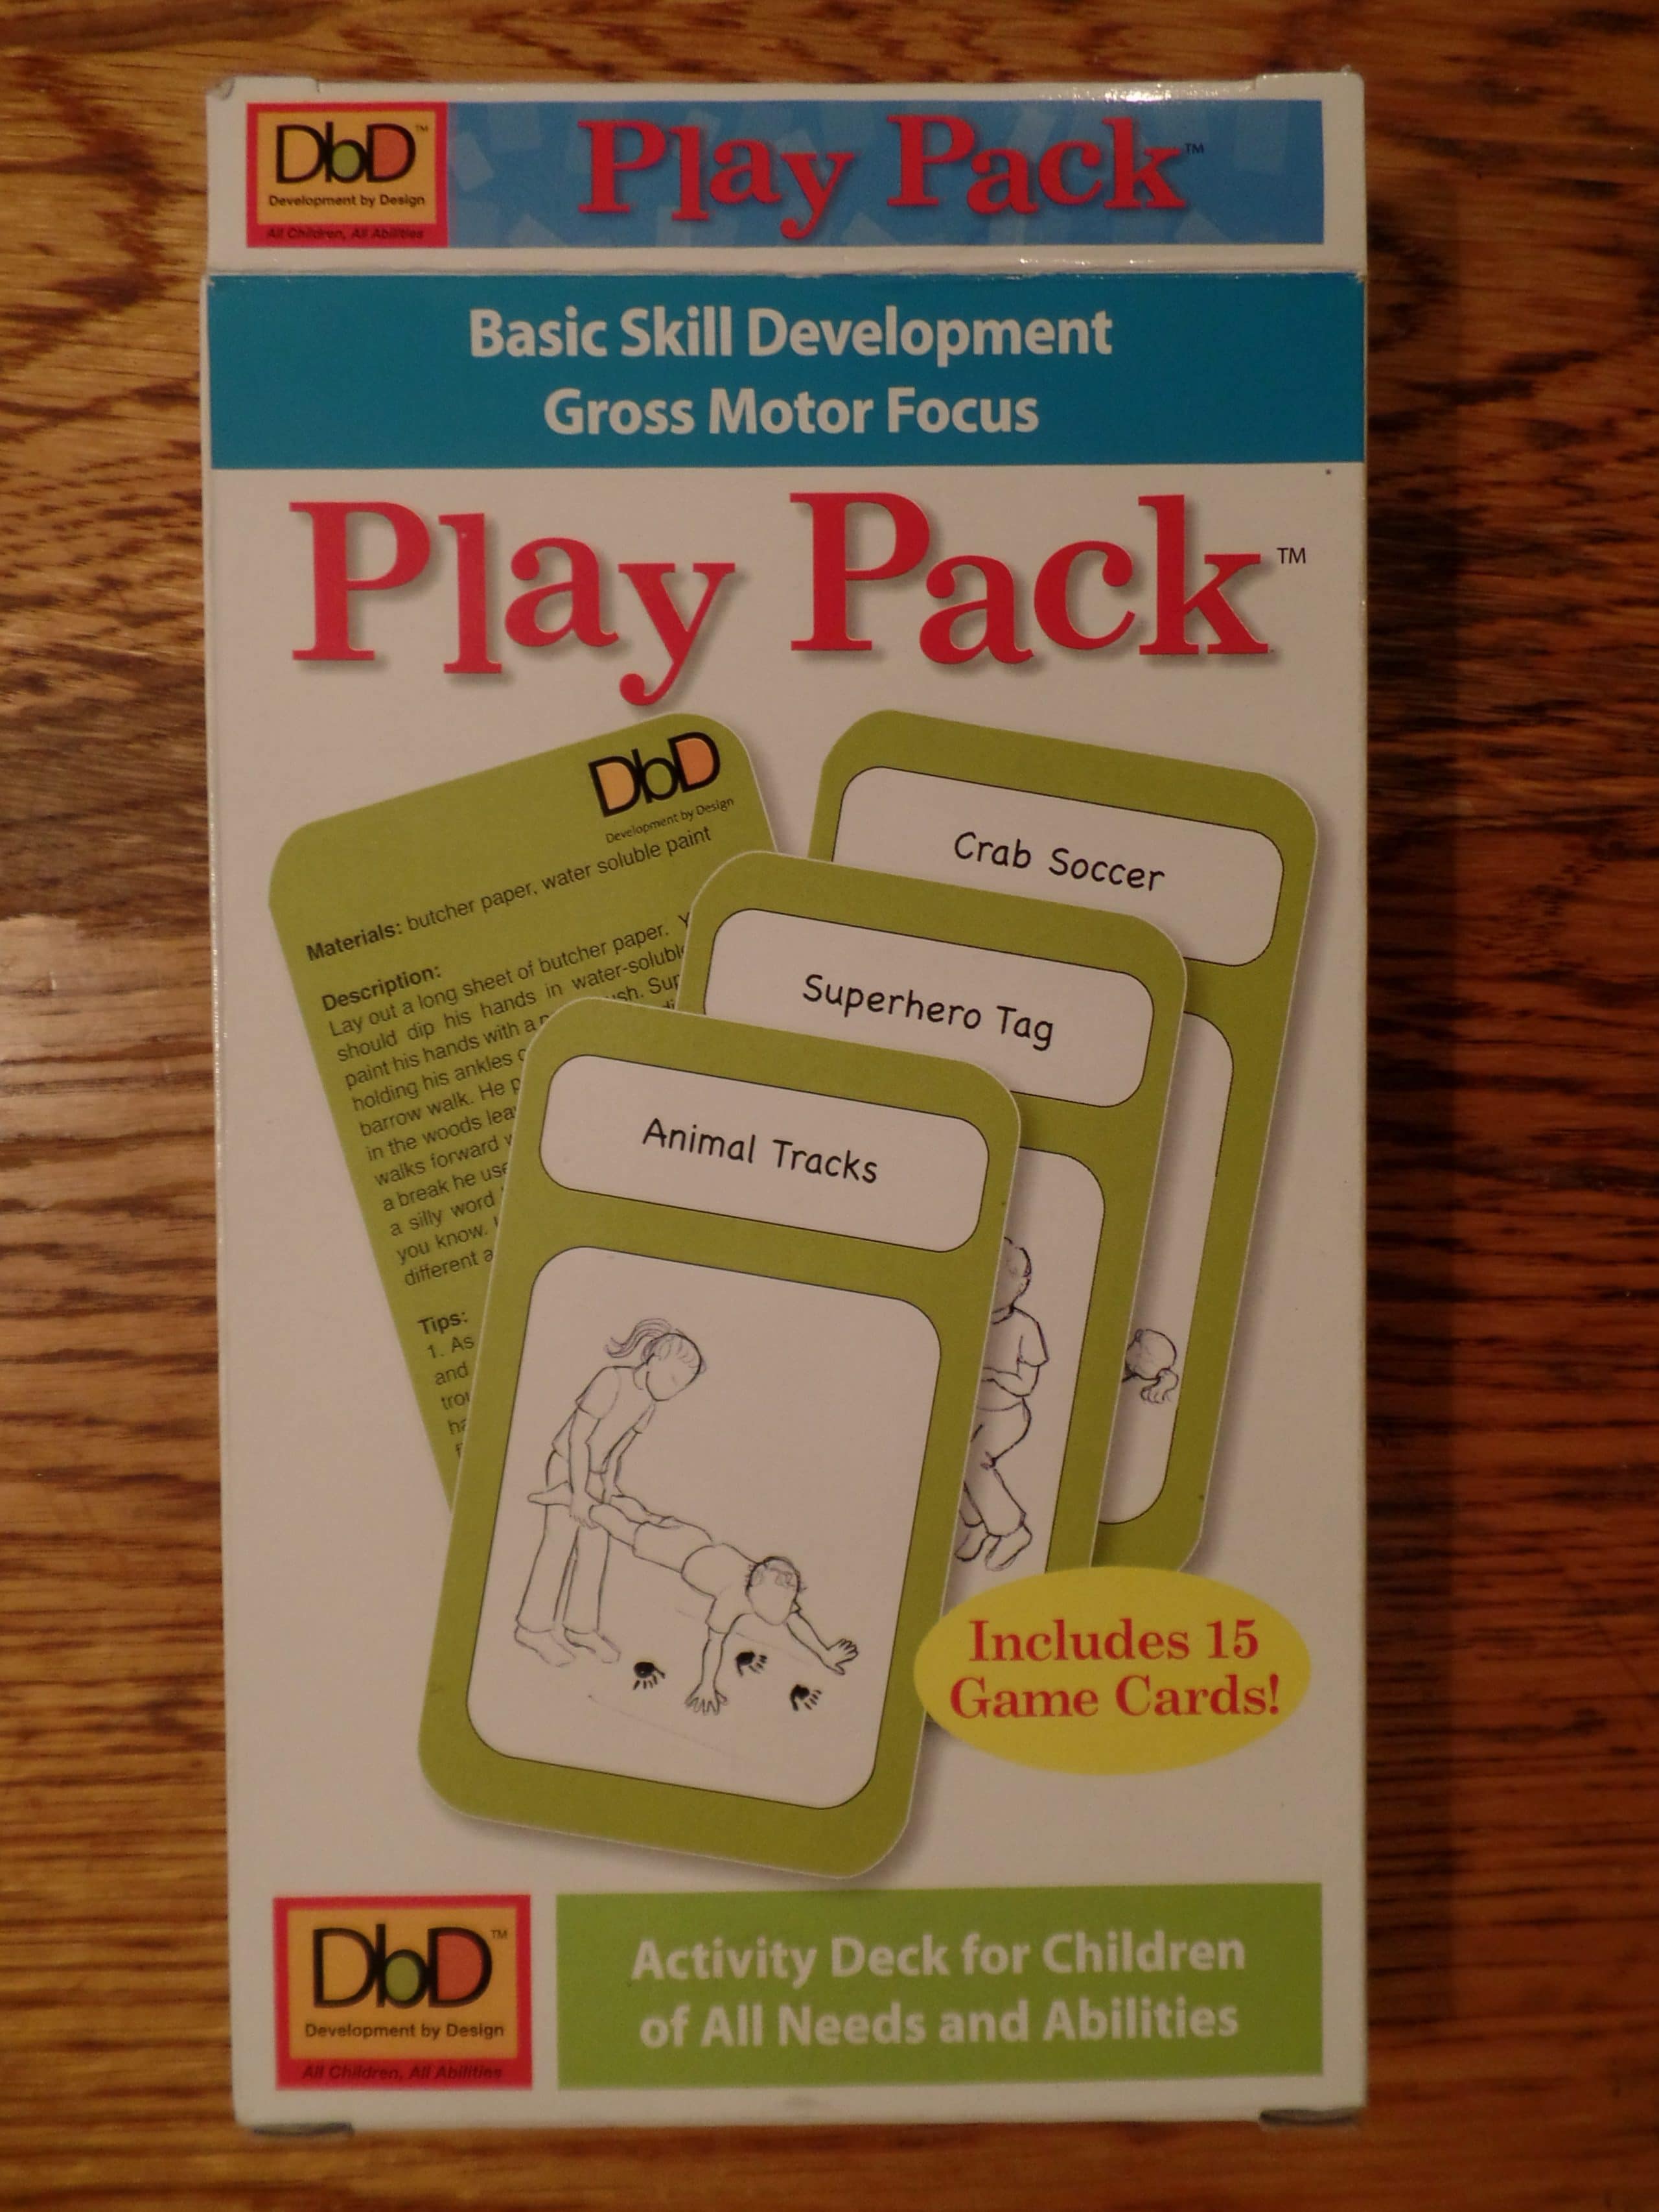 Play Pack – Play Activities for Gross Motor Development – My Review